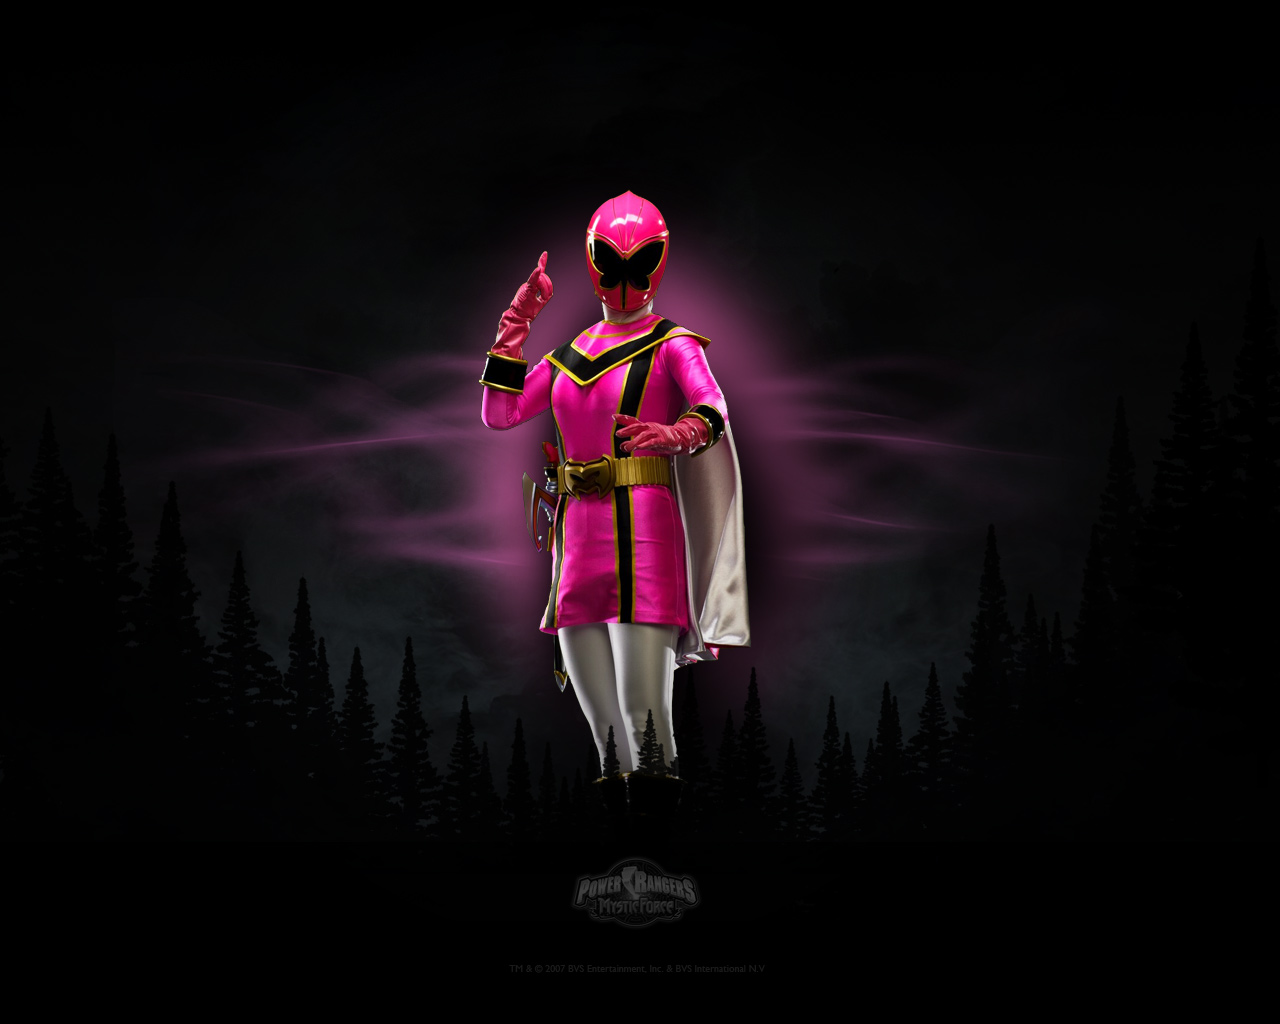 Power Rangers Mystic Force Wallpapers